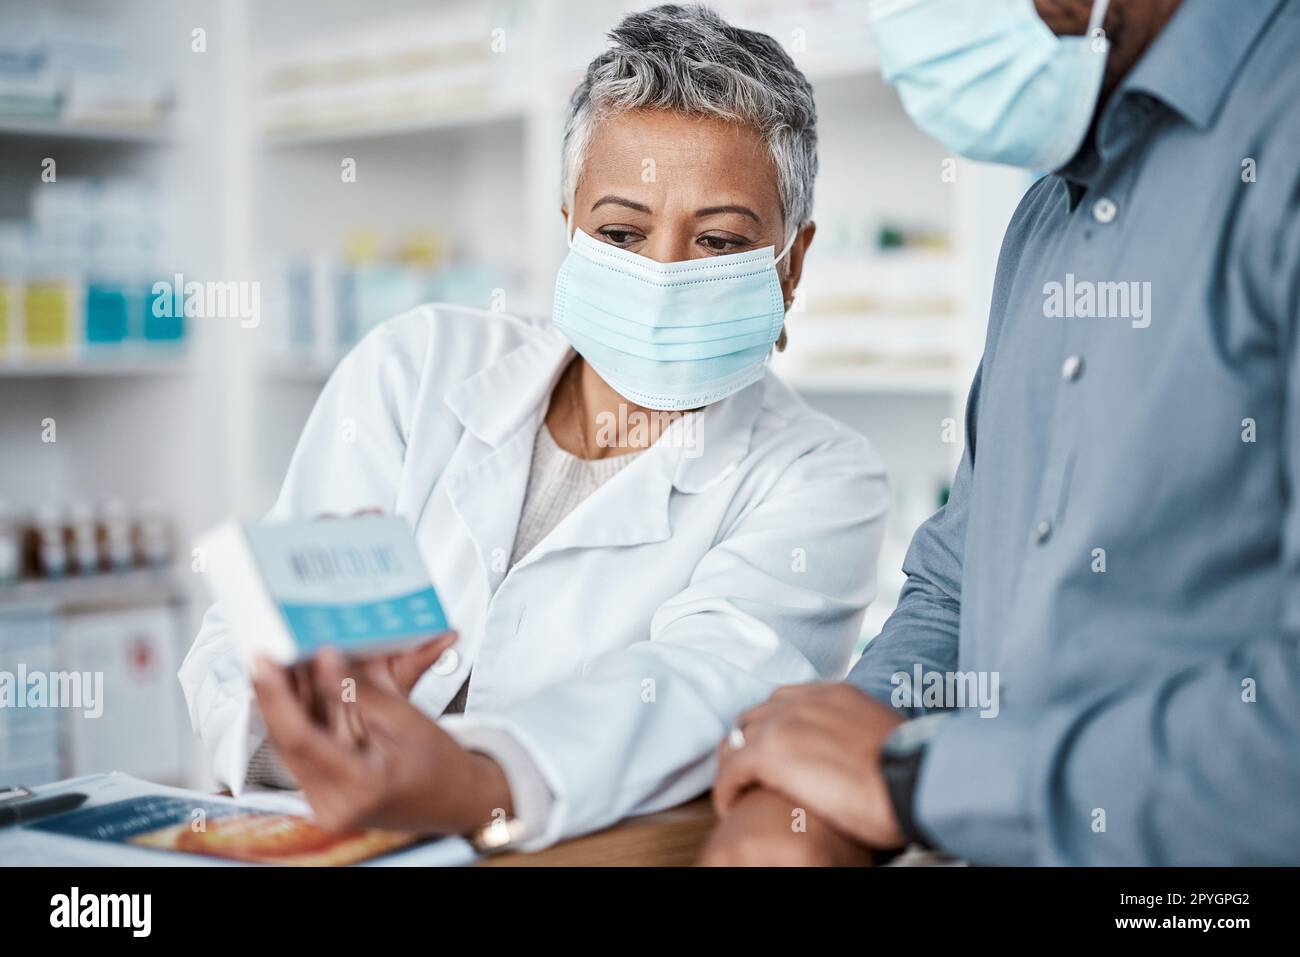 Covid, pharmacy and woman with box consulting patient on prescription, medication or medicine. Corona, healthcare and senior female medical professional showing black man health product in drug store Stock Photo